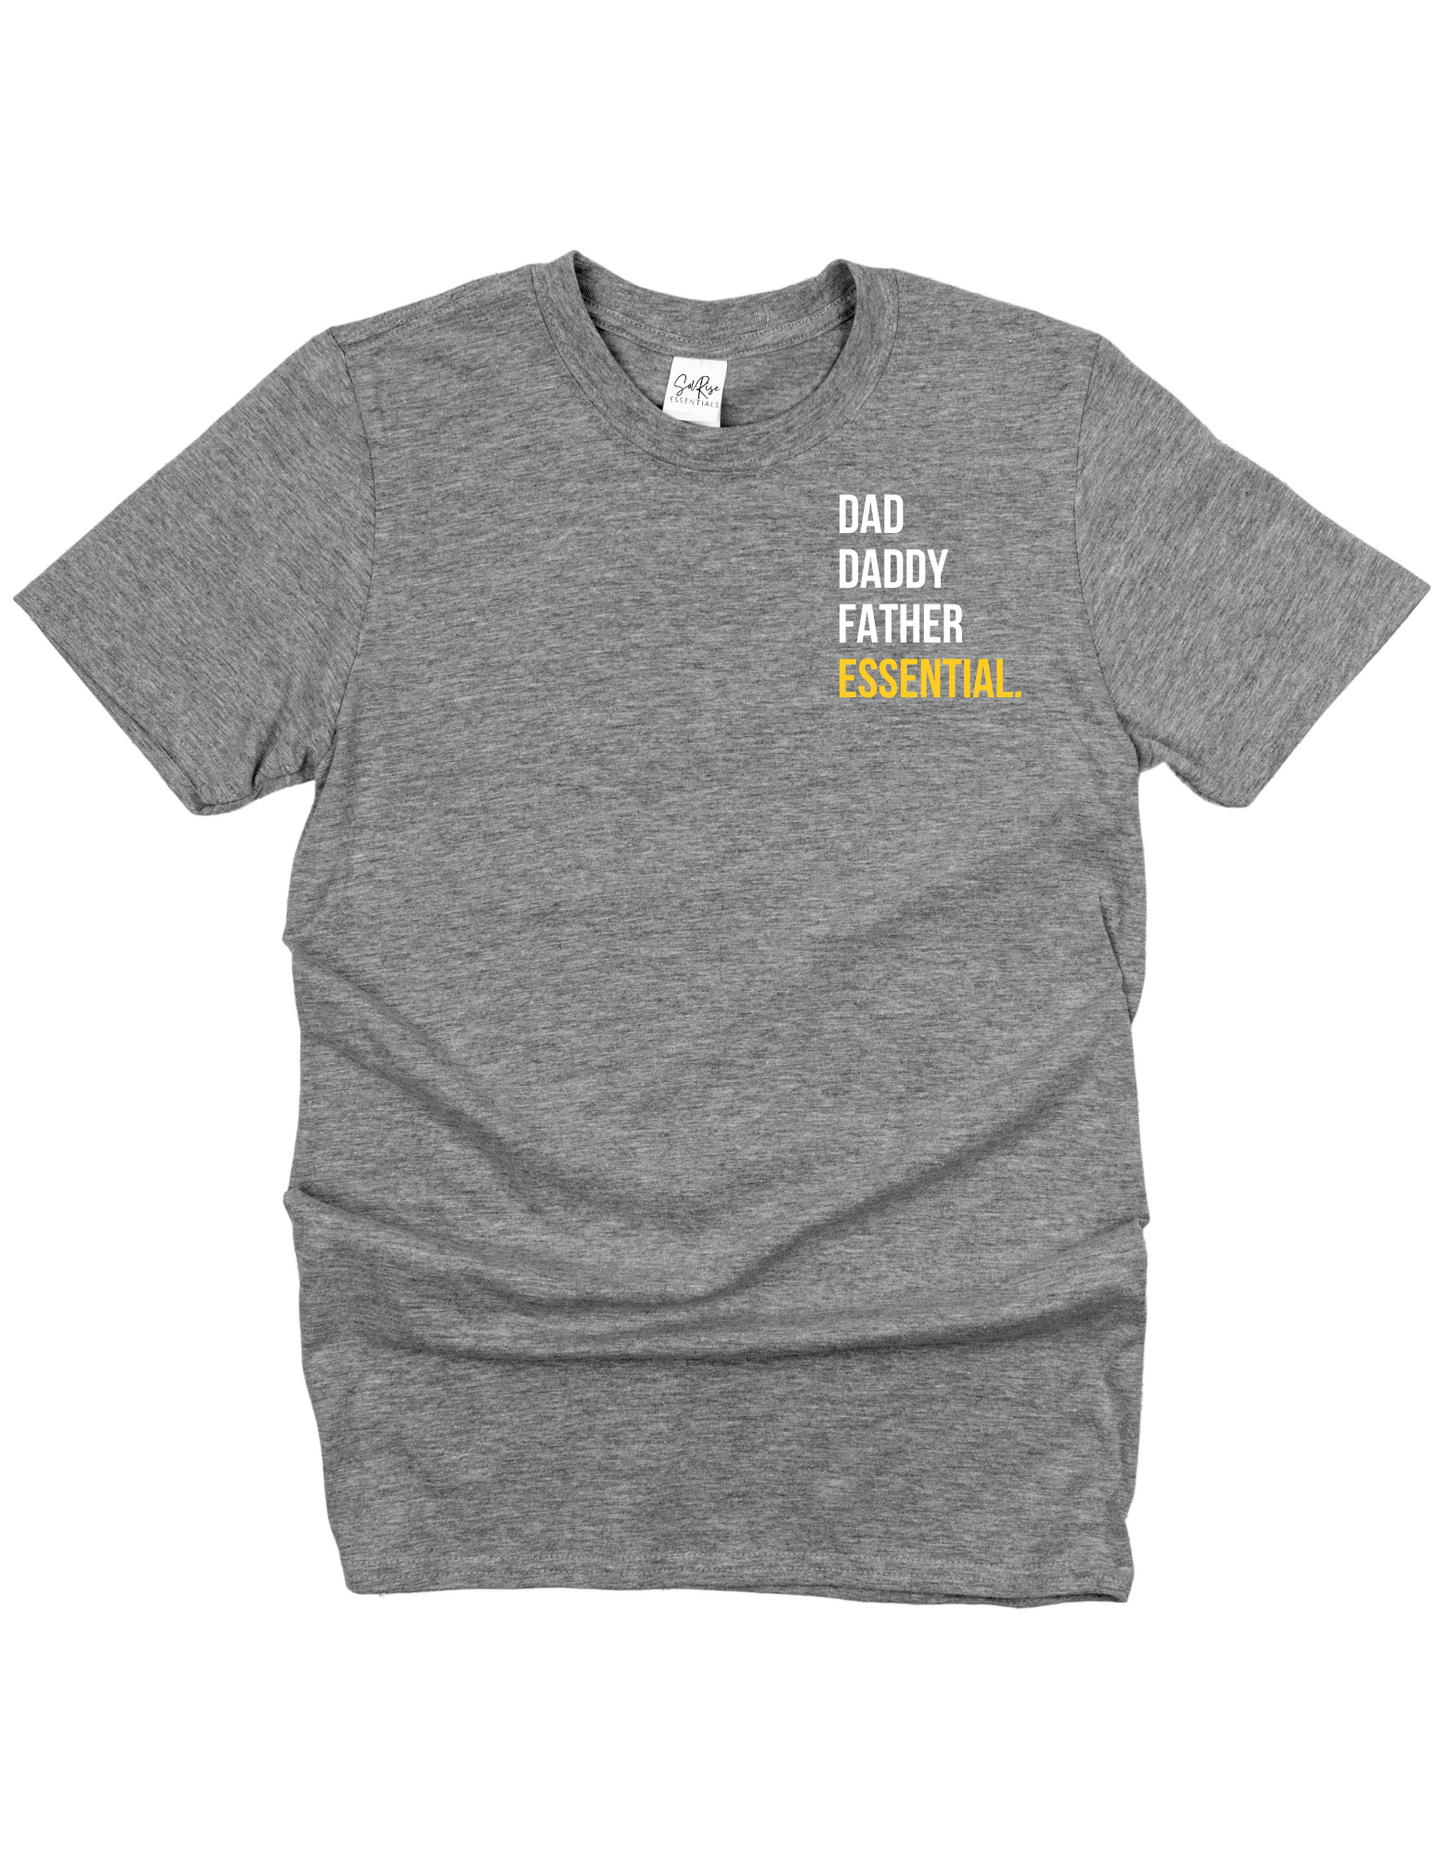 Essential Dad tee from Sol Rise Essentials - fathers day tshirt for great dads in color gray grey